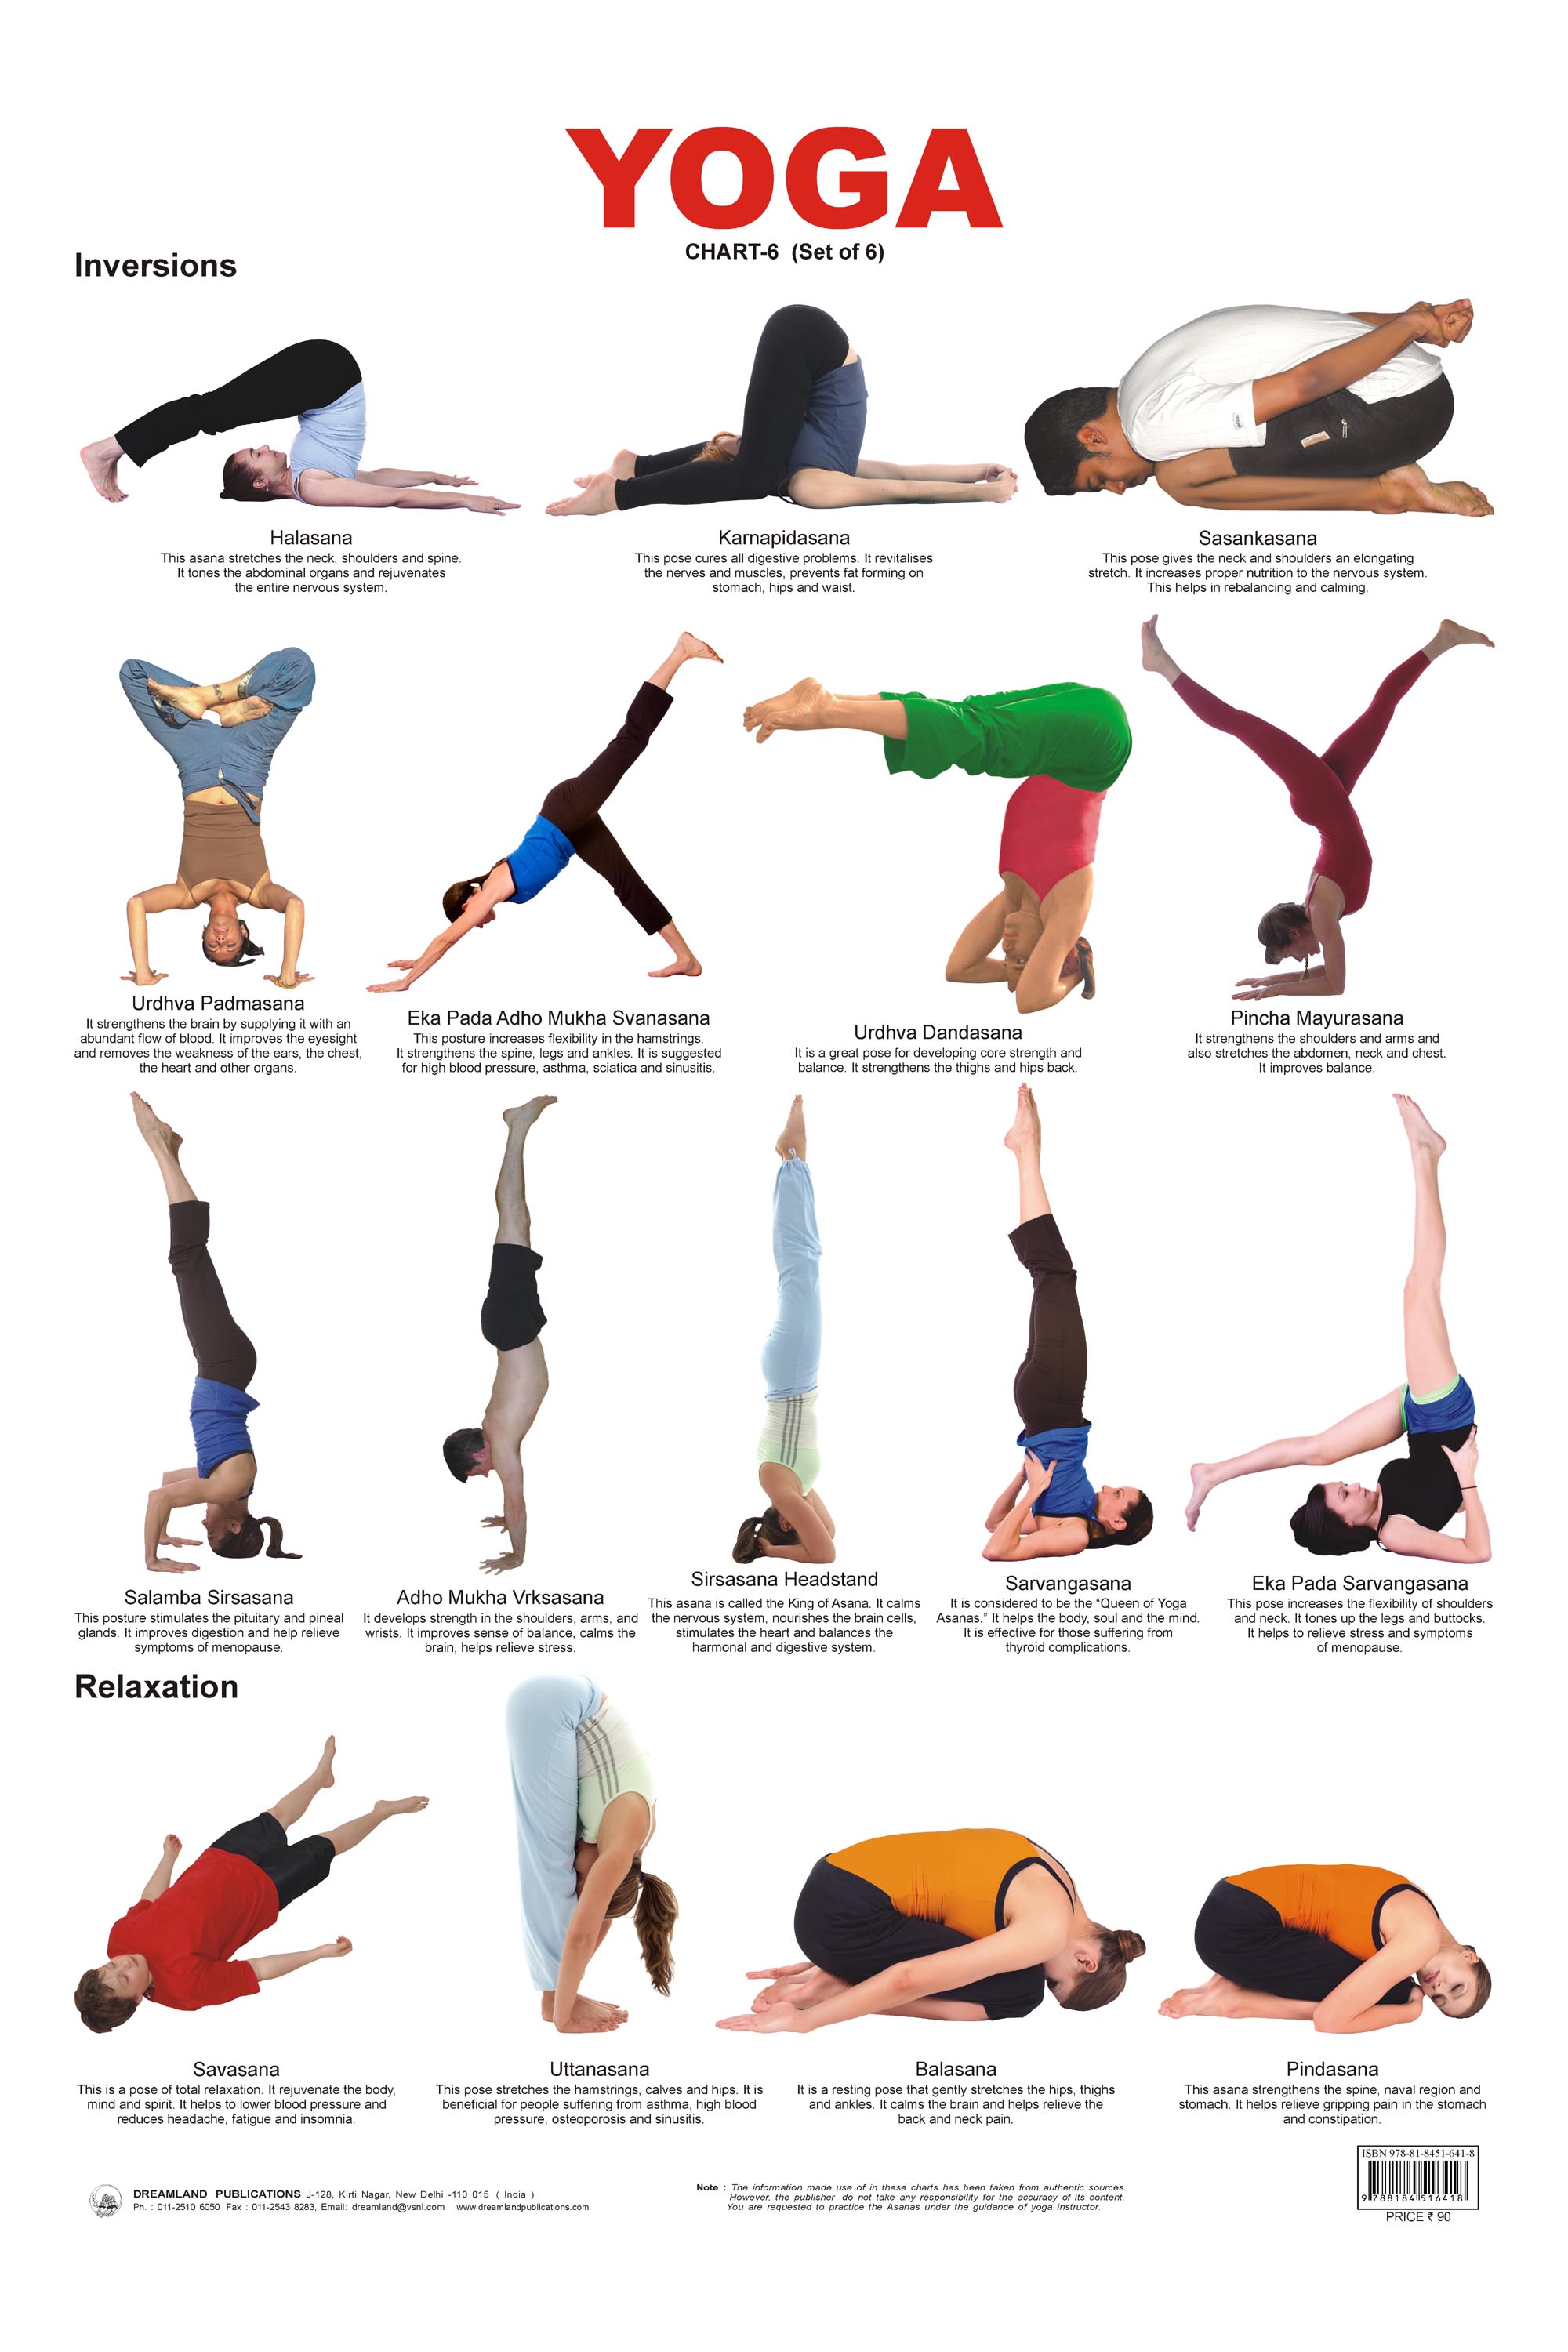 YOGA ANATOMY IMAGE BASED YOGA POSES FOR ENERGY,STRENGTH,FLEXIBILITY,STRESS  RELIEF,BACK PAIN RELIEF Etc.